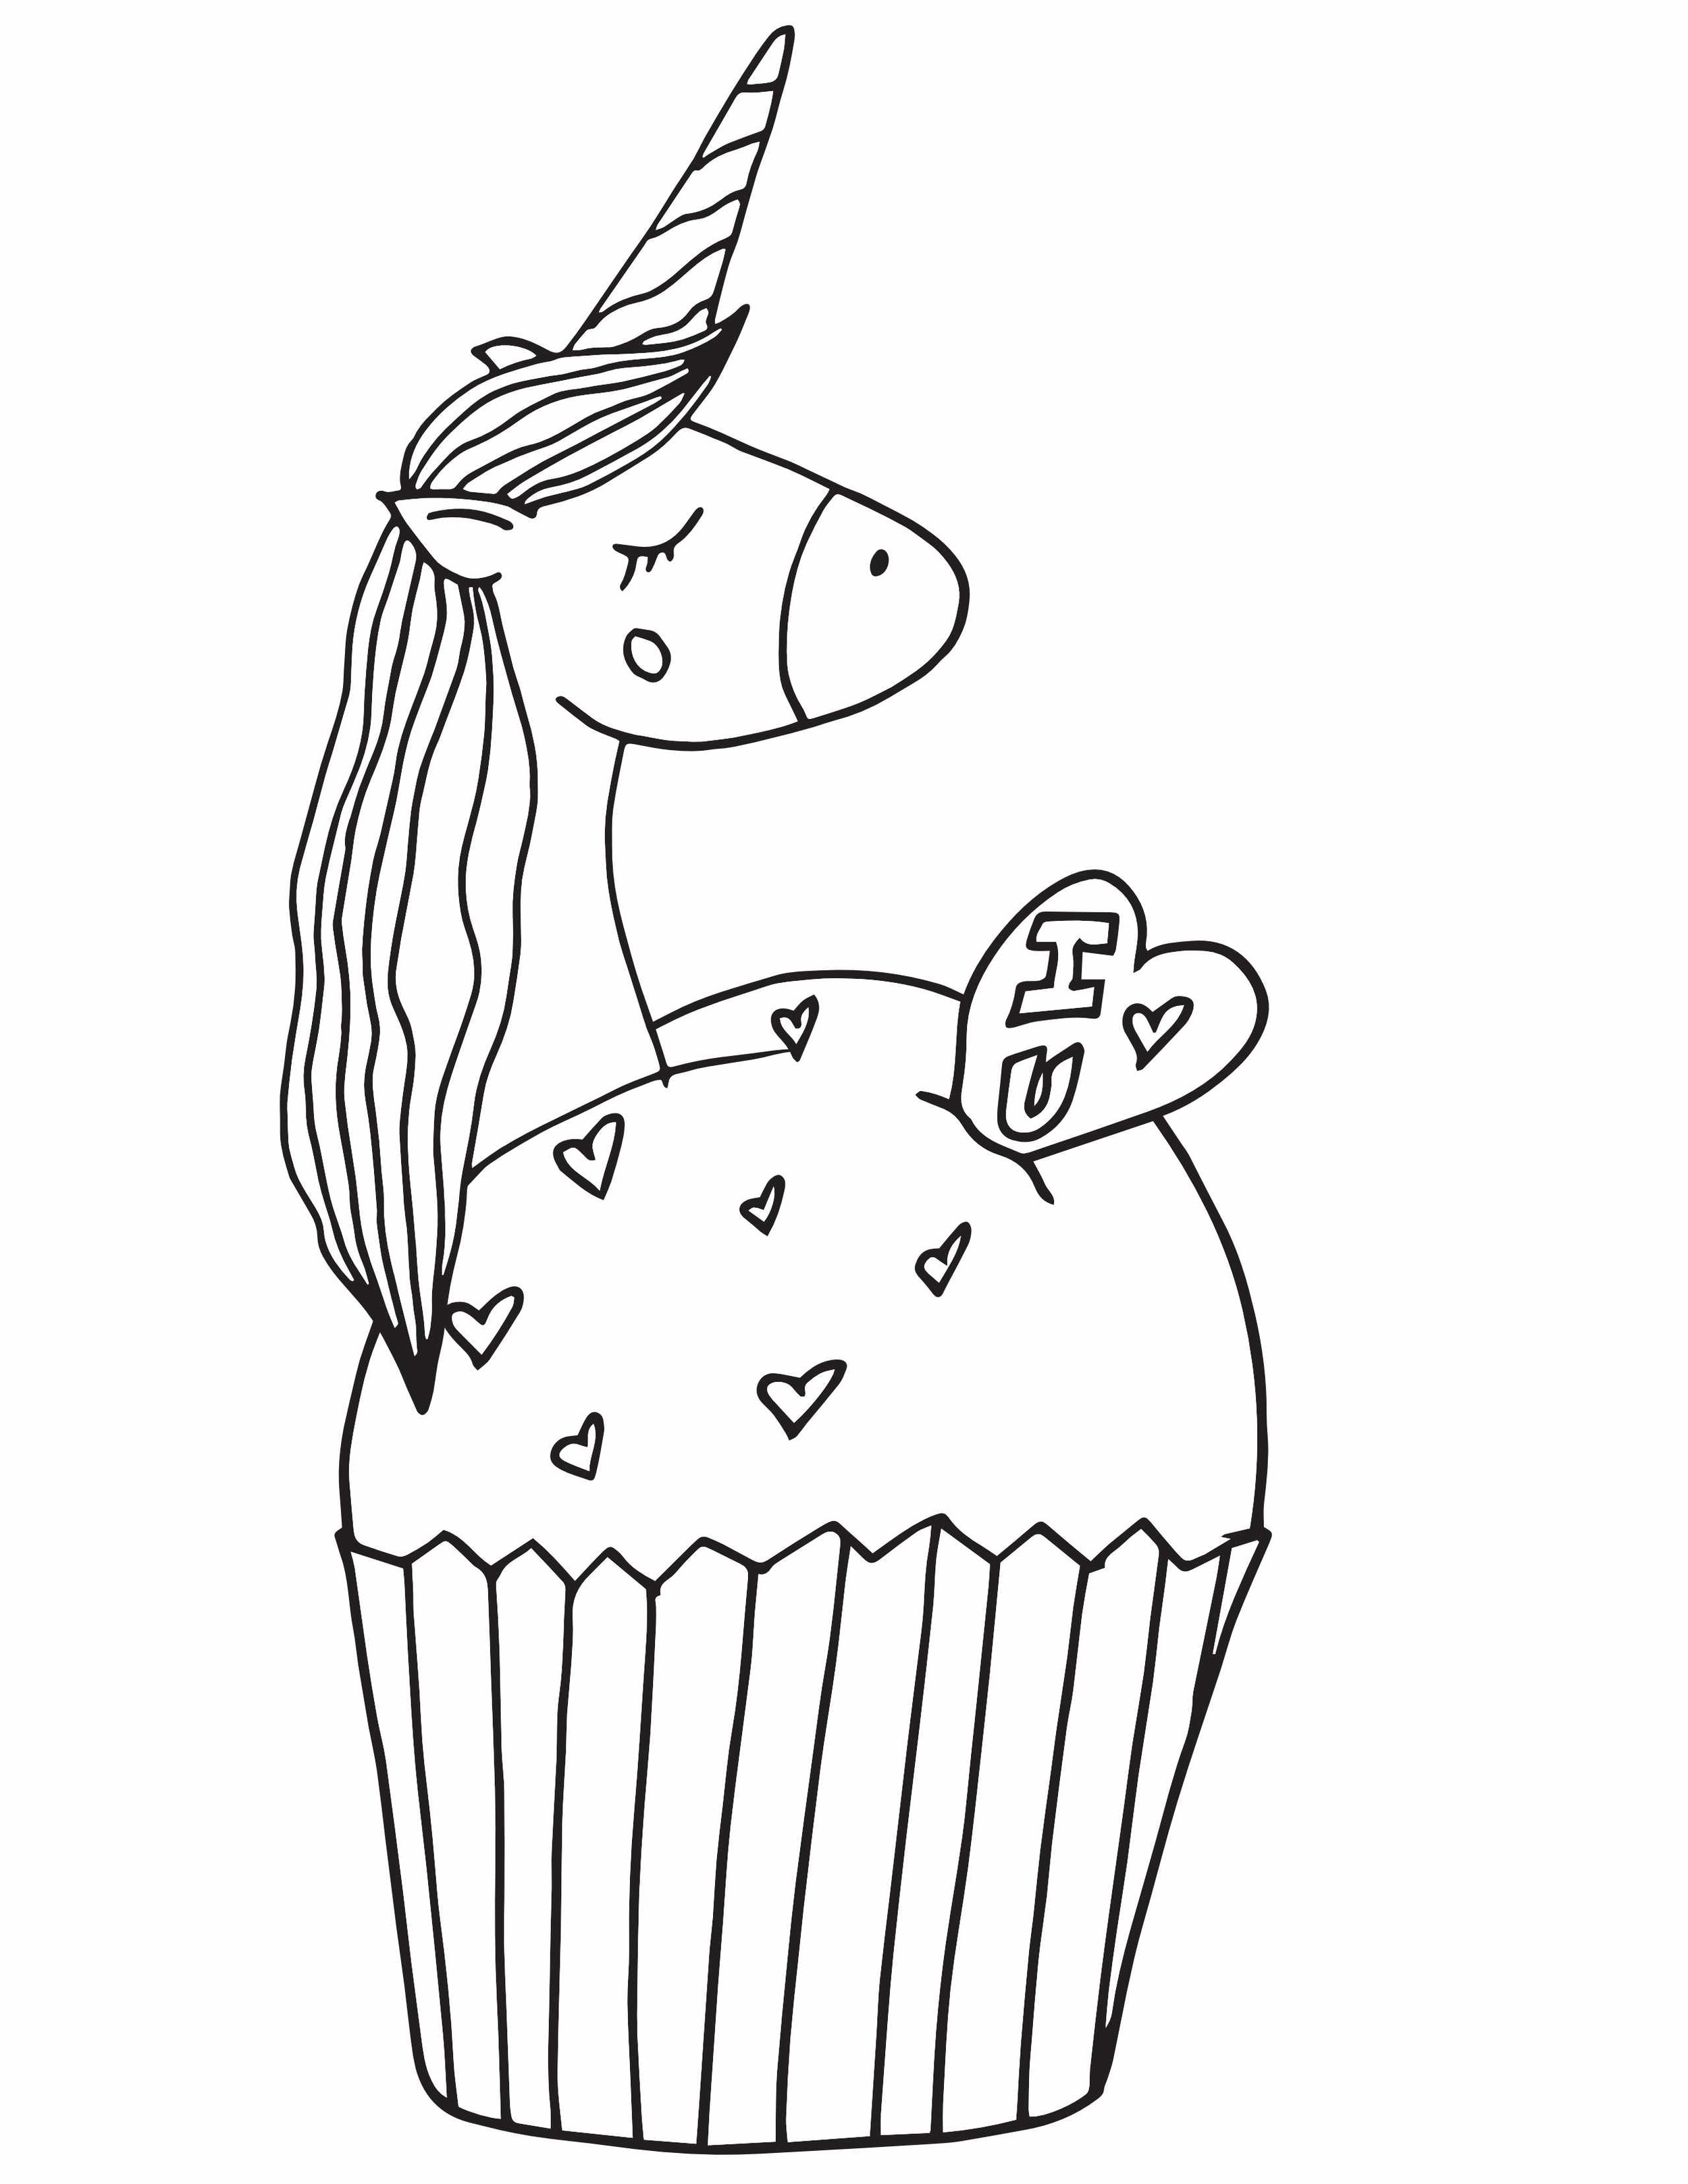 a cupcake with a unicorn head coloring page